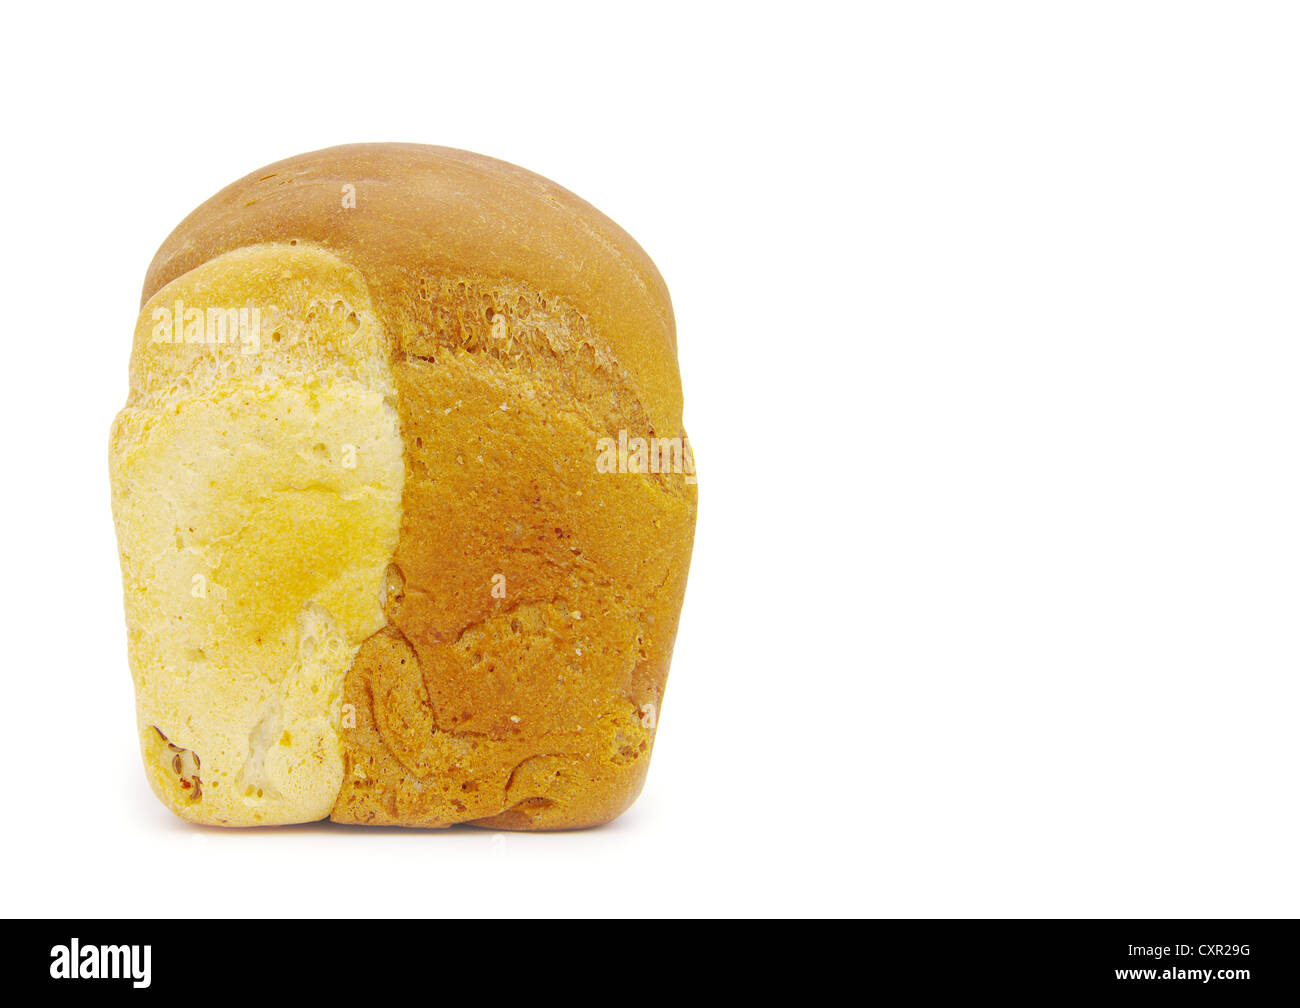 loaf of bread isolated on white background Stock Photo